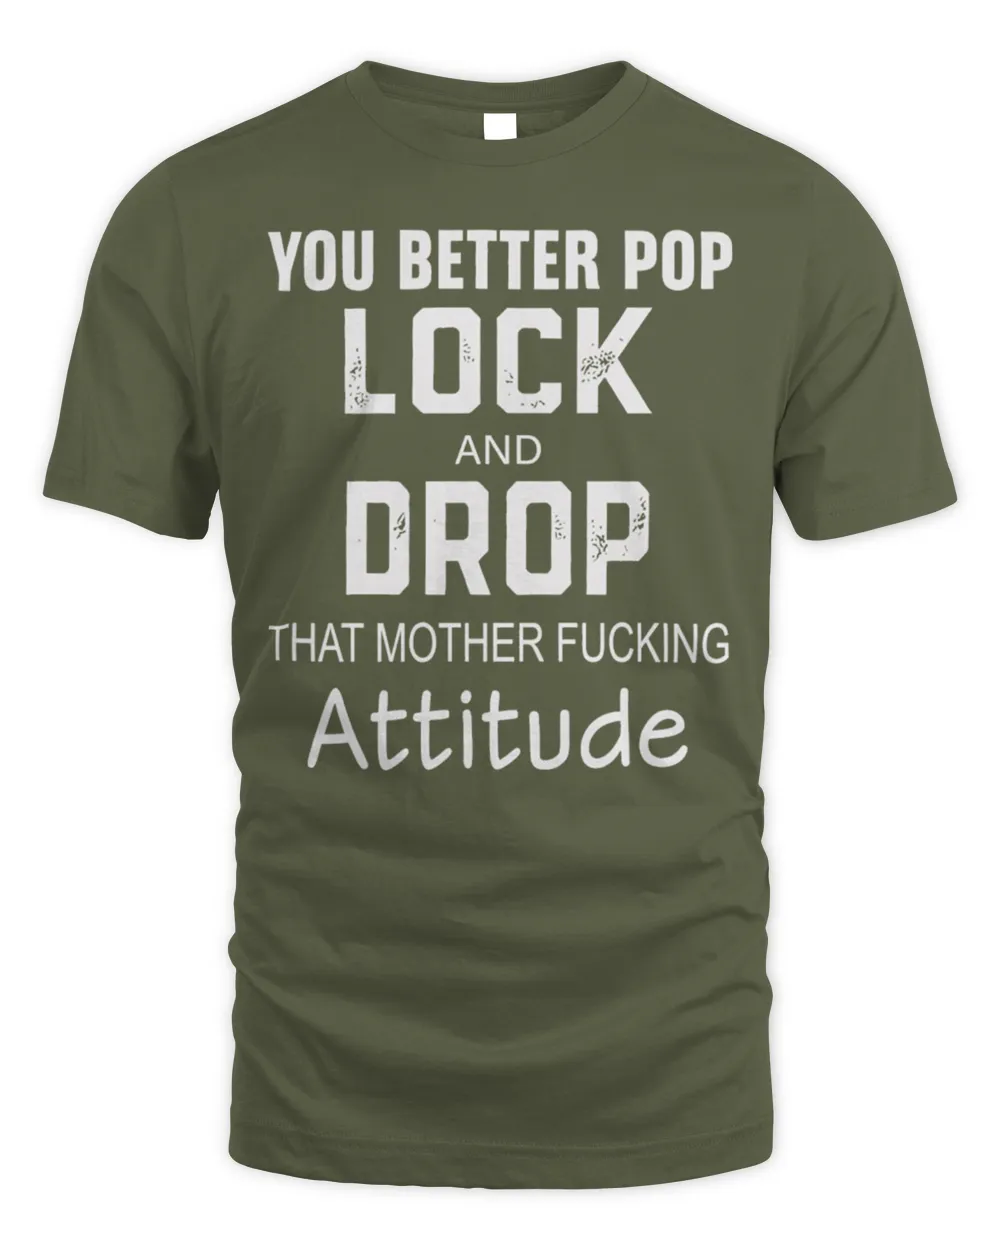 You better pop lock and drop that mother fucking attitude shirt